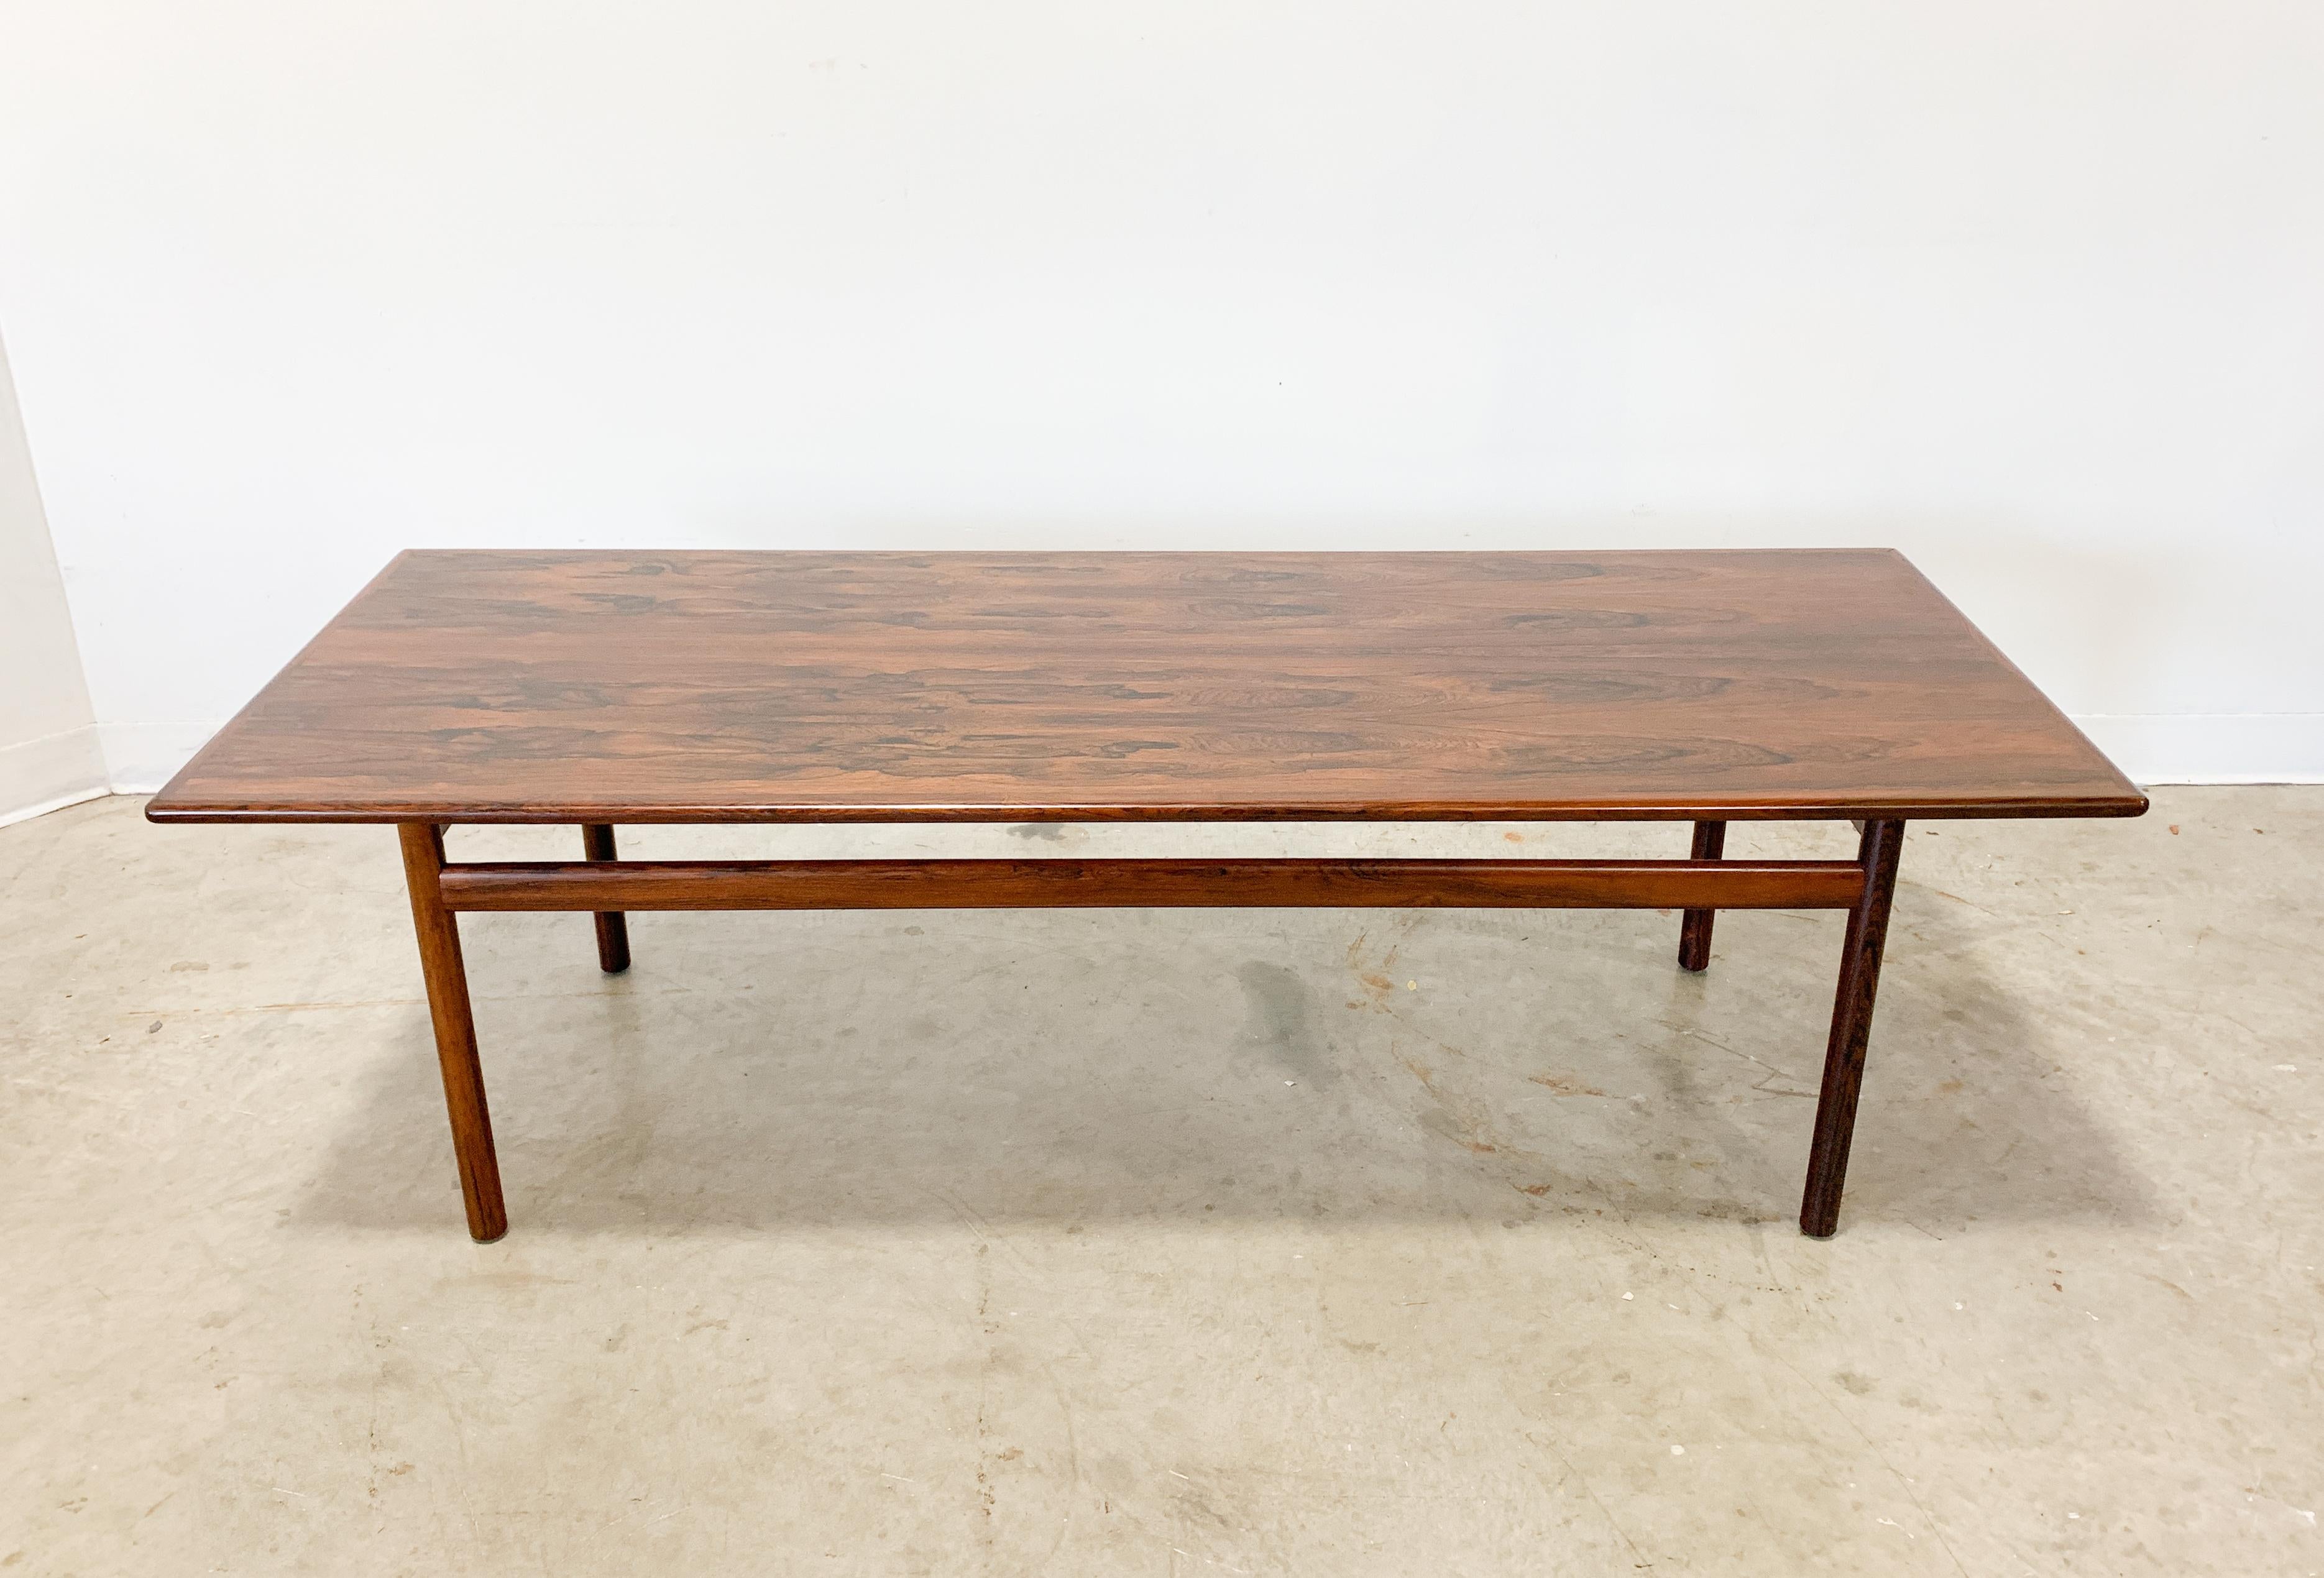 Beautiful rosewood table designed by Tobjorn Afdal for Vatne Mobler. Stunning grain across this Minimalist Scandinavian coffee table. Solid rosewood legs. Excellent condition.

Dimensions 60 x 18 x 15 H.